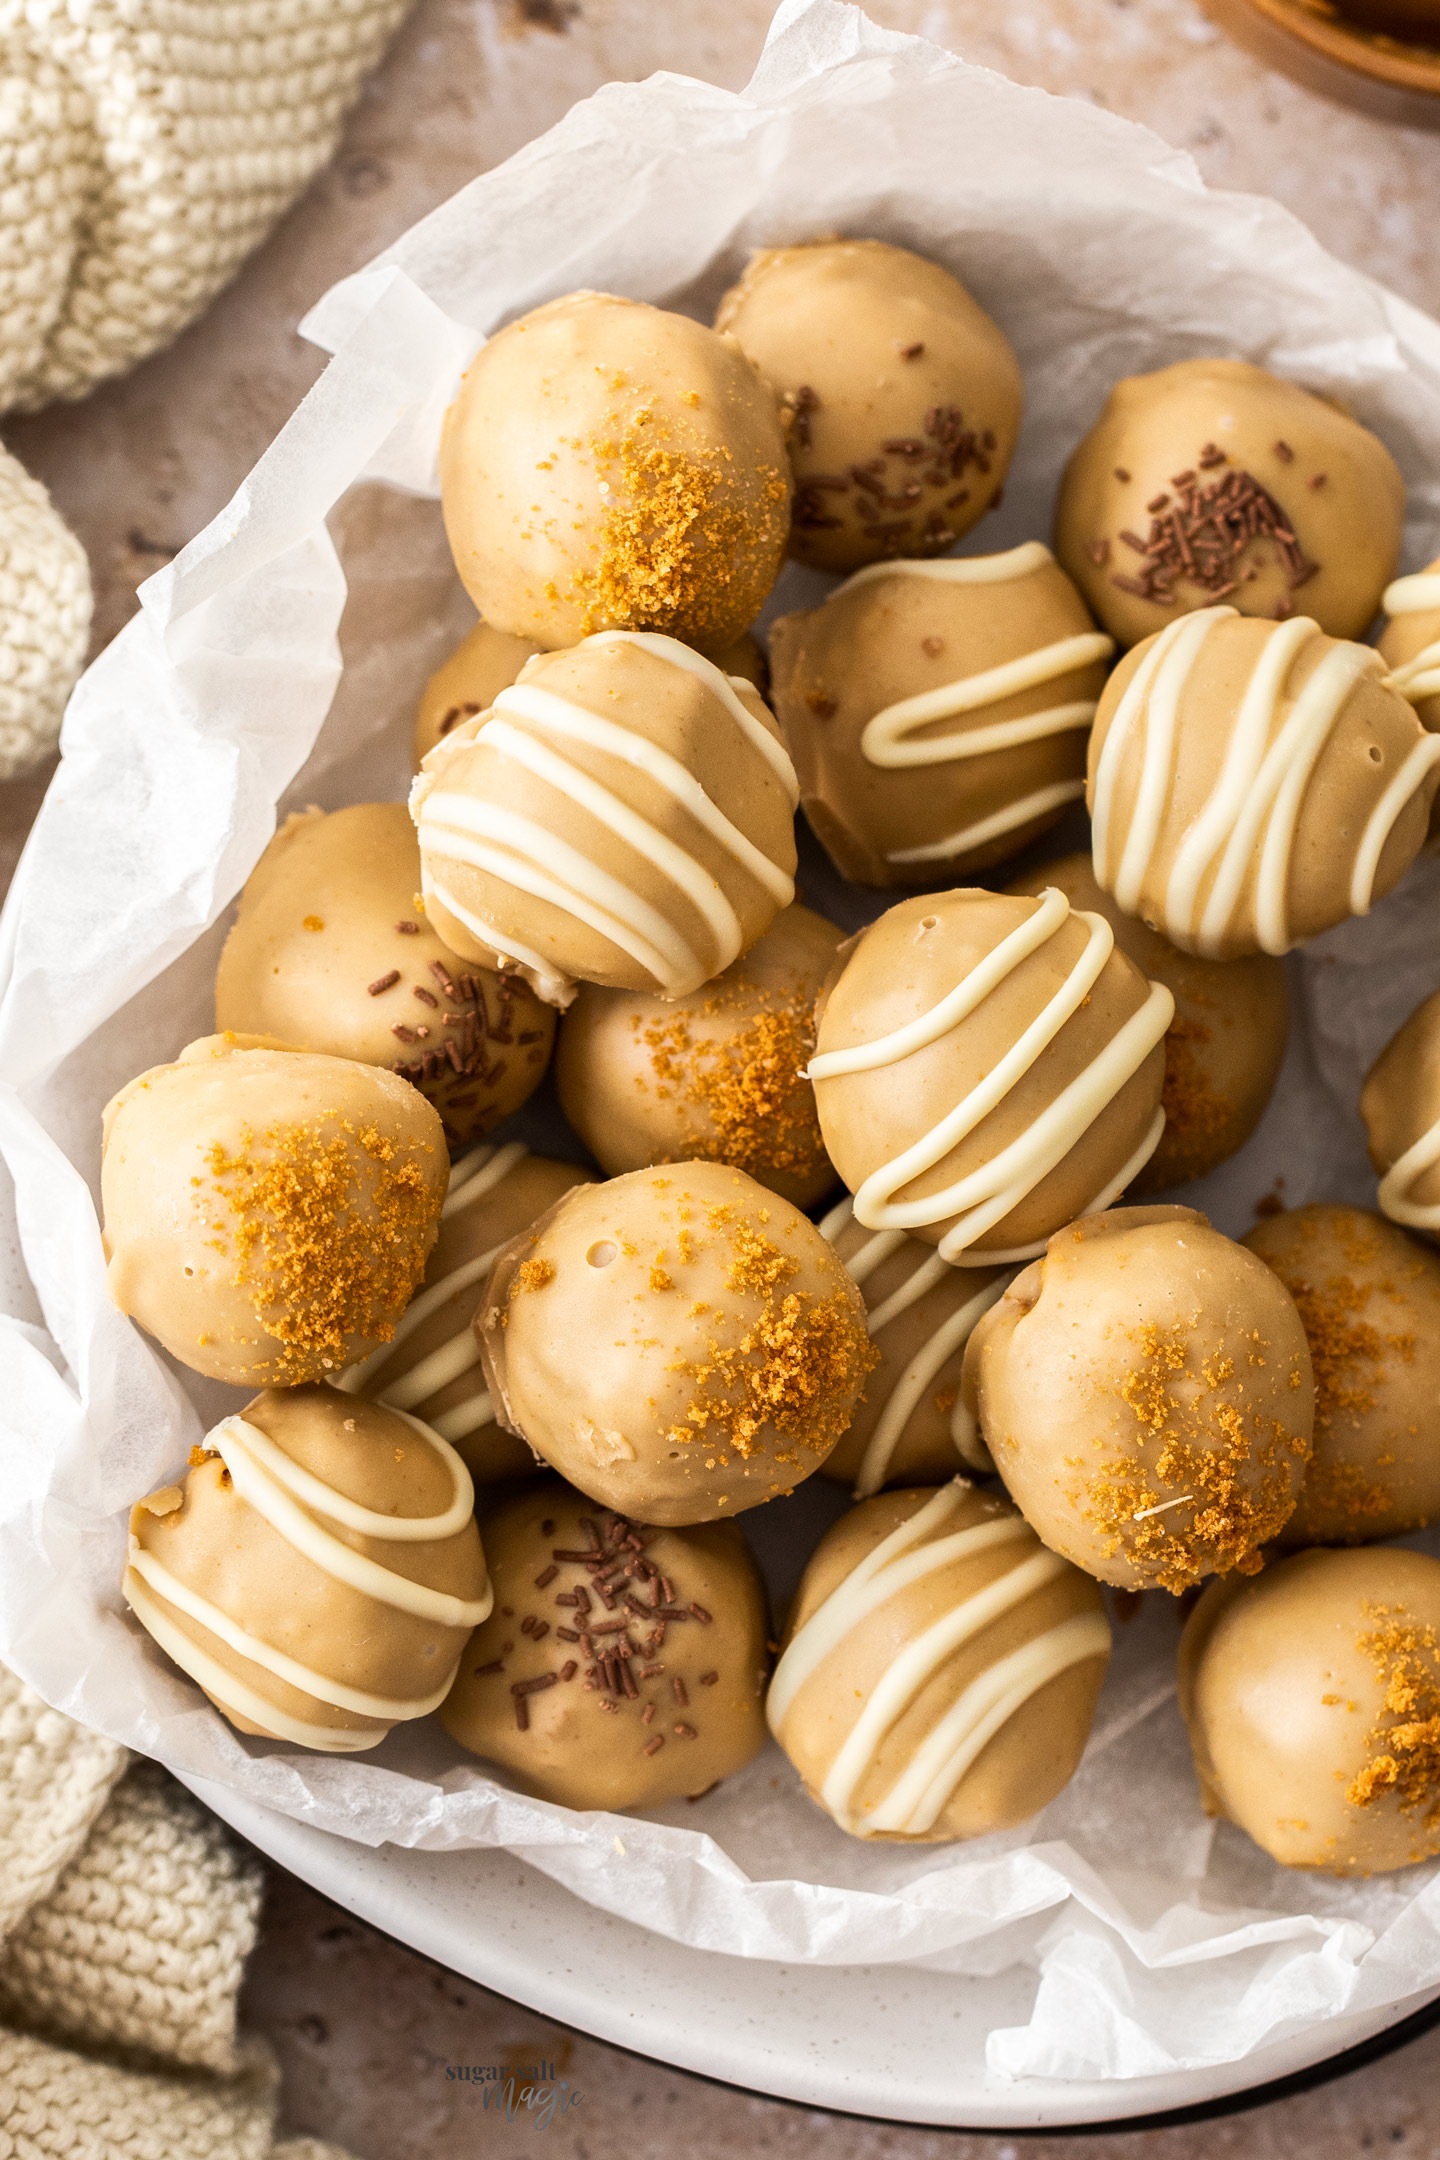 A batch of Biscoff truffles on a sheet of baking paper.